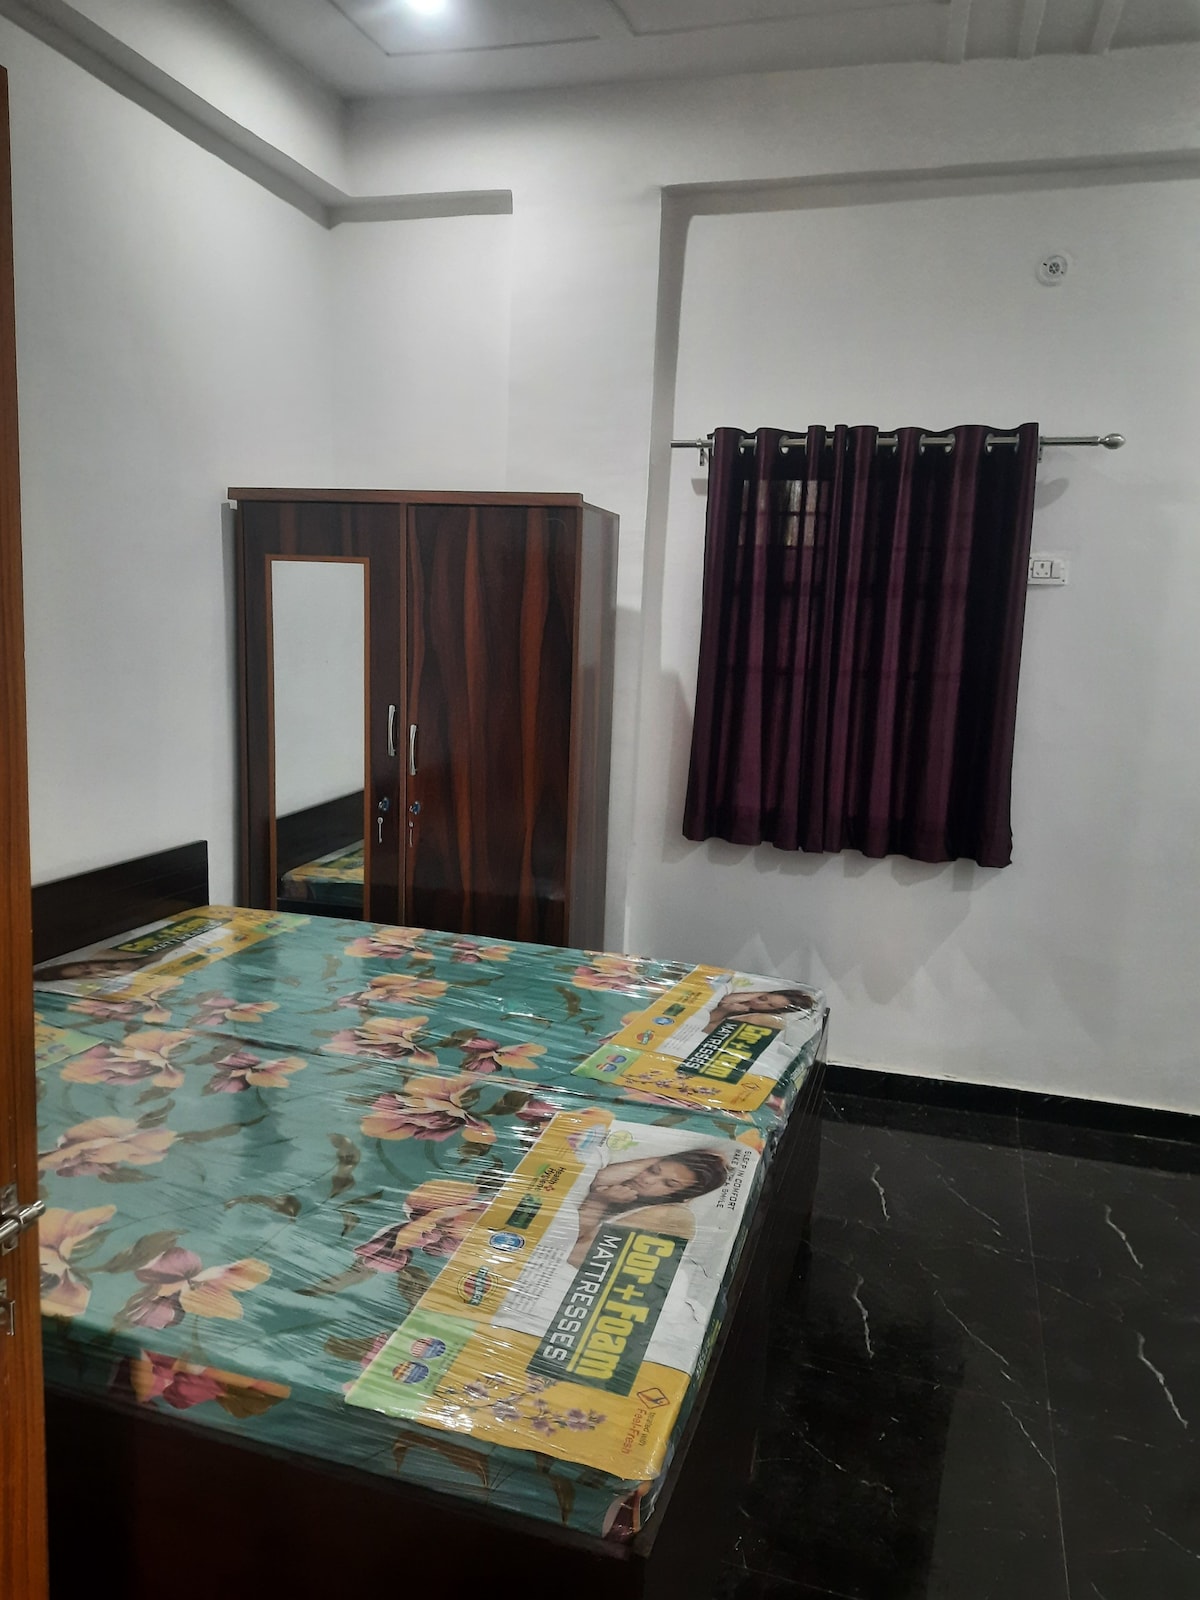 Guest house available noida 63A